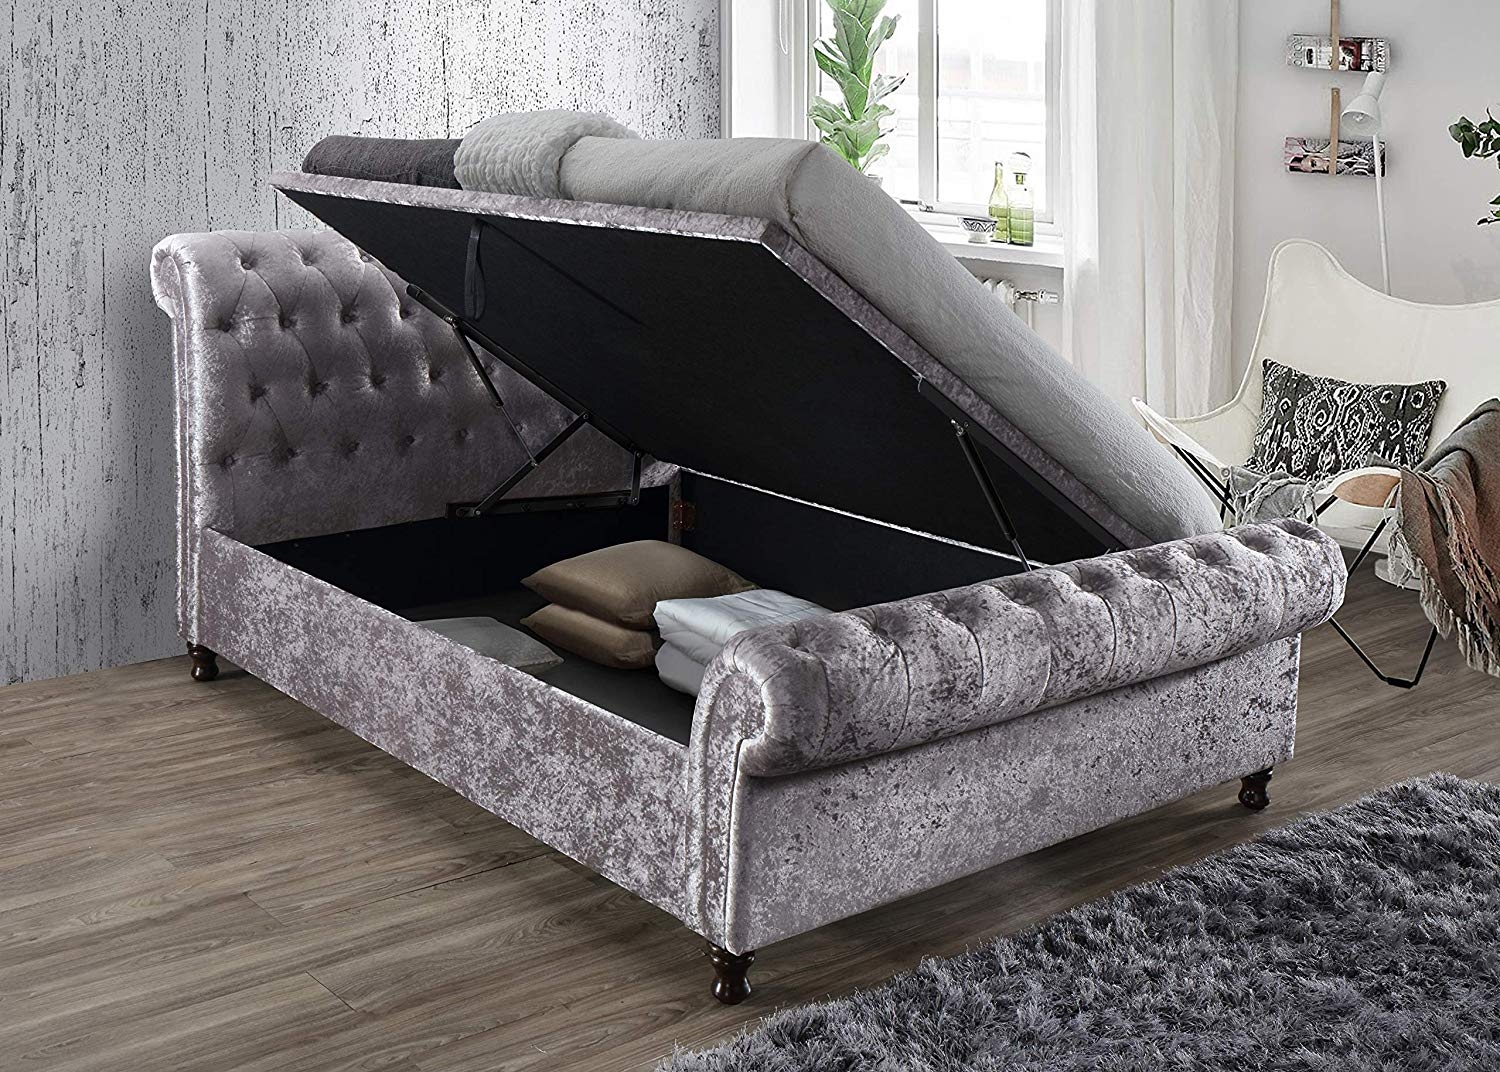 Sleigh Ottoman Bed Variety of colours and sizes vary from double king and super king